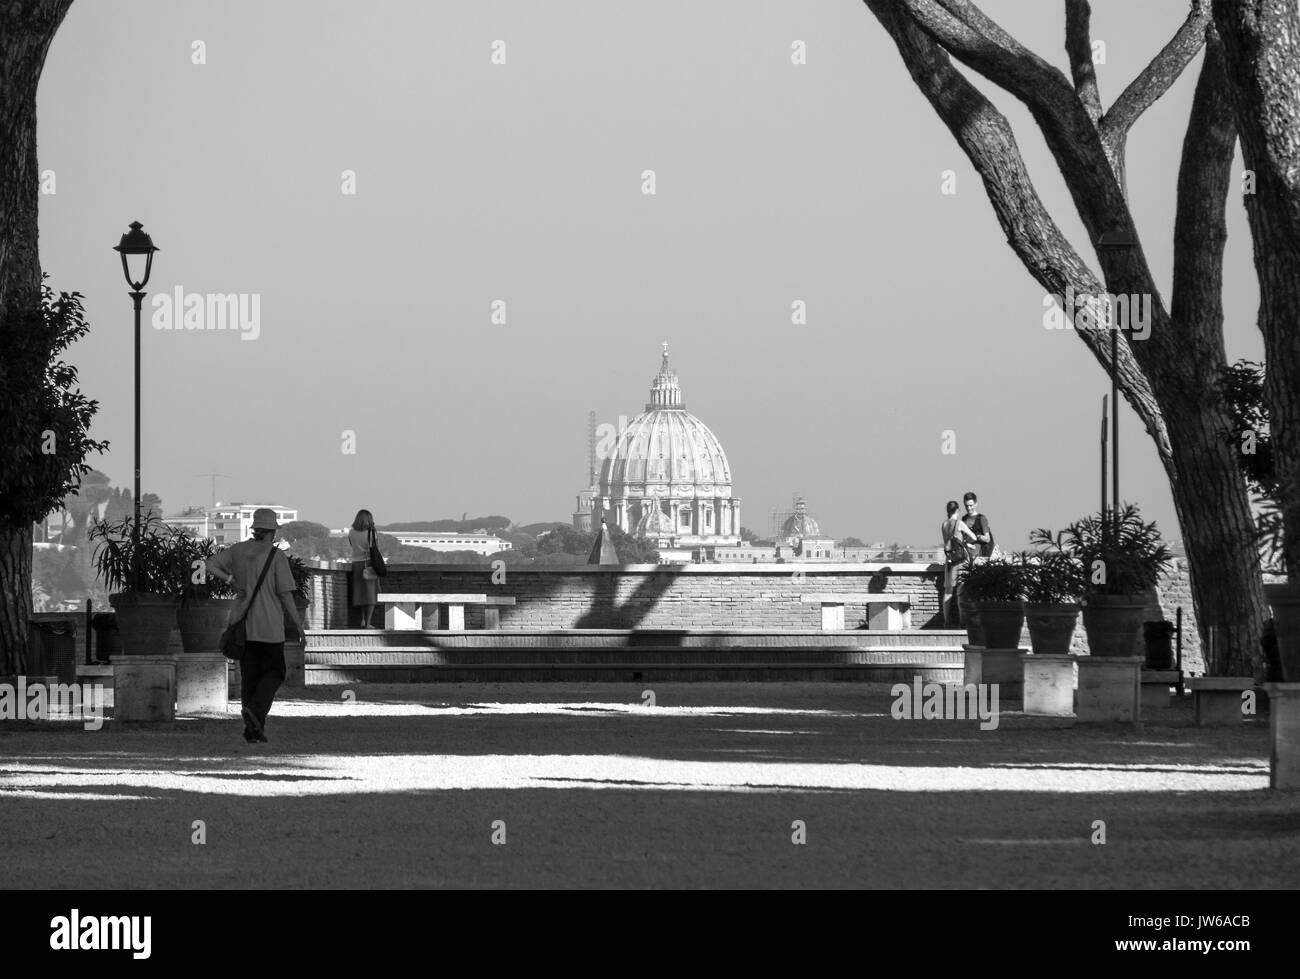 Rome, Italy - The terrace named Orange Garden in Aventino hill, with view on Saint Peter dome and famous keyhole of 'Cavalieri di Malta' square. Stock Photo